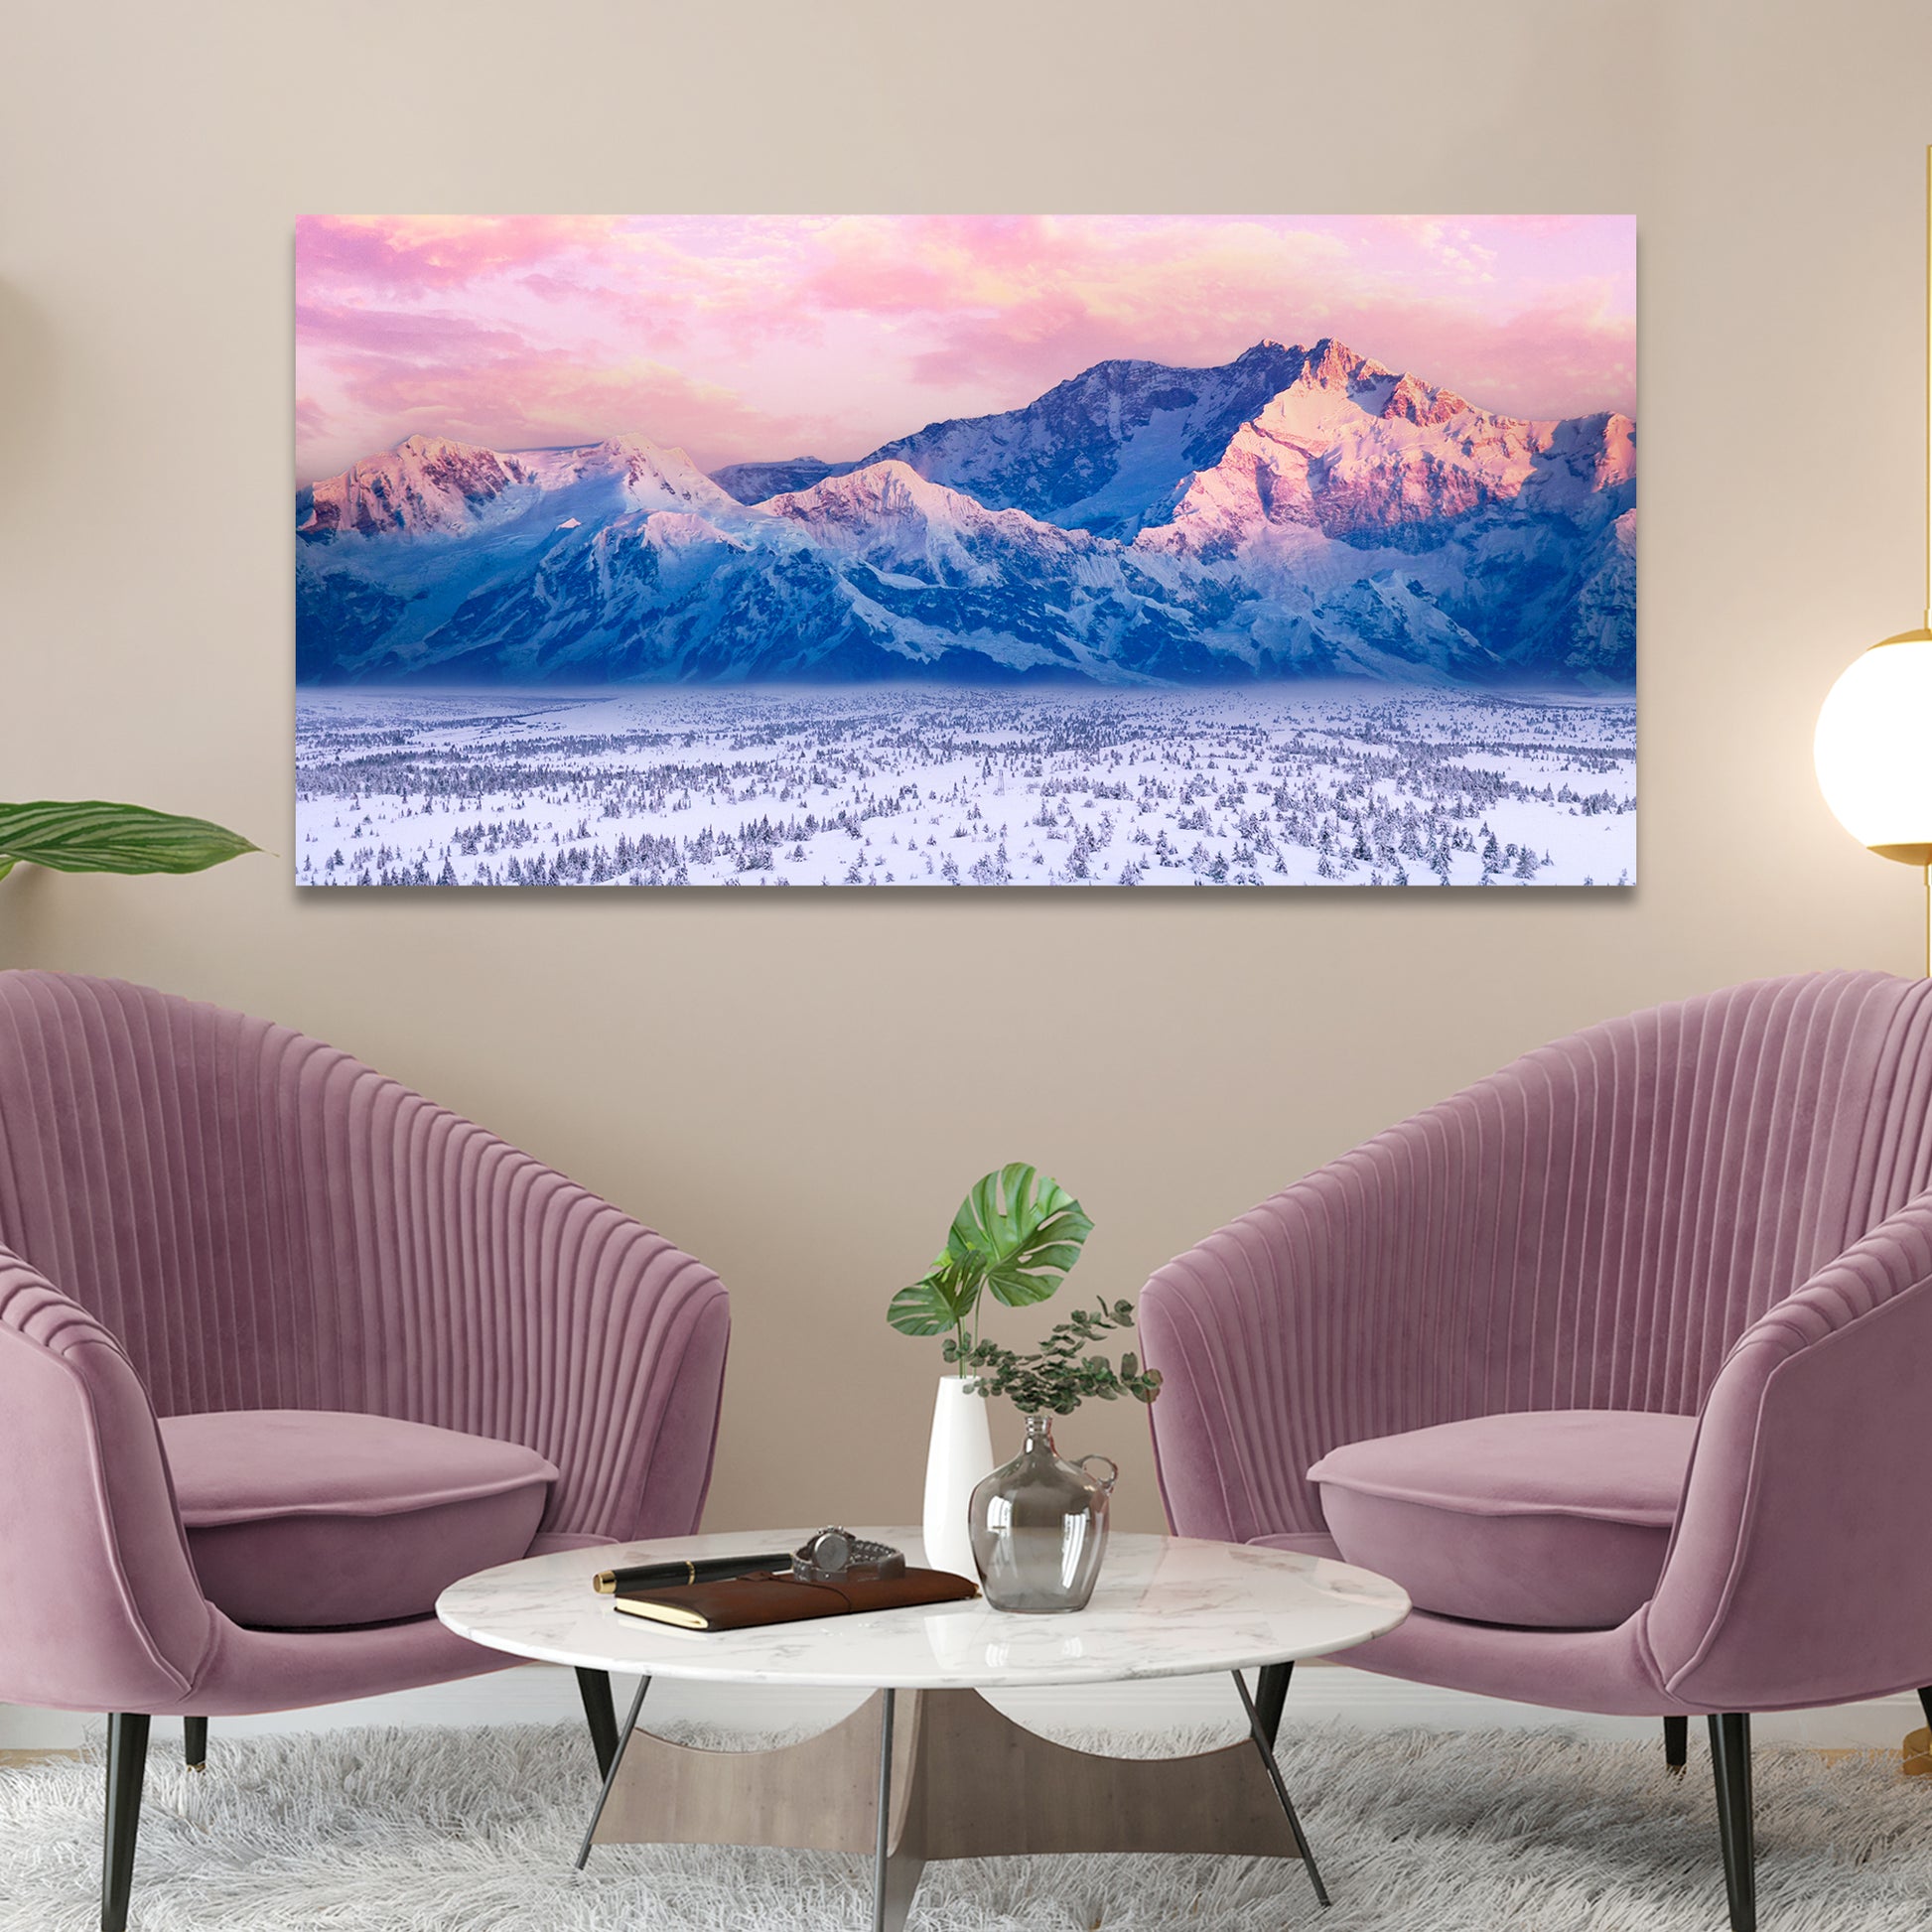 Pink Skies Over Snow Capped Mountain Canvas Wall Art - Image by Tailored Canvases